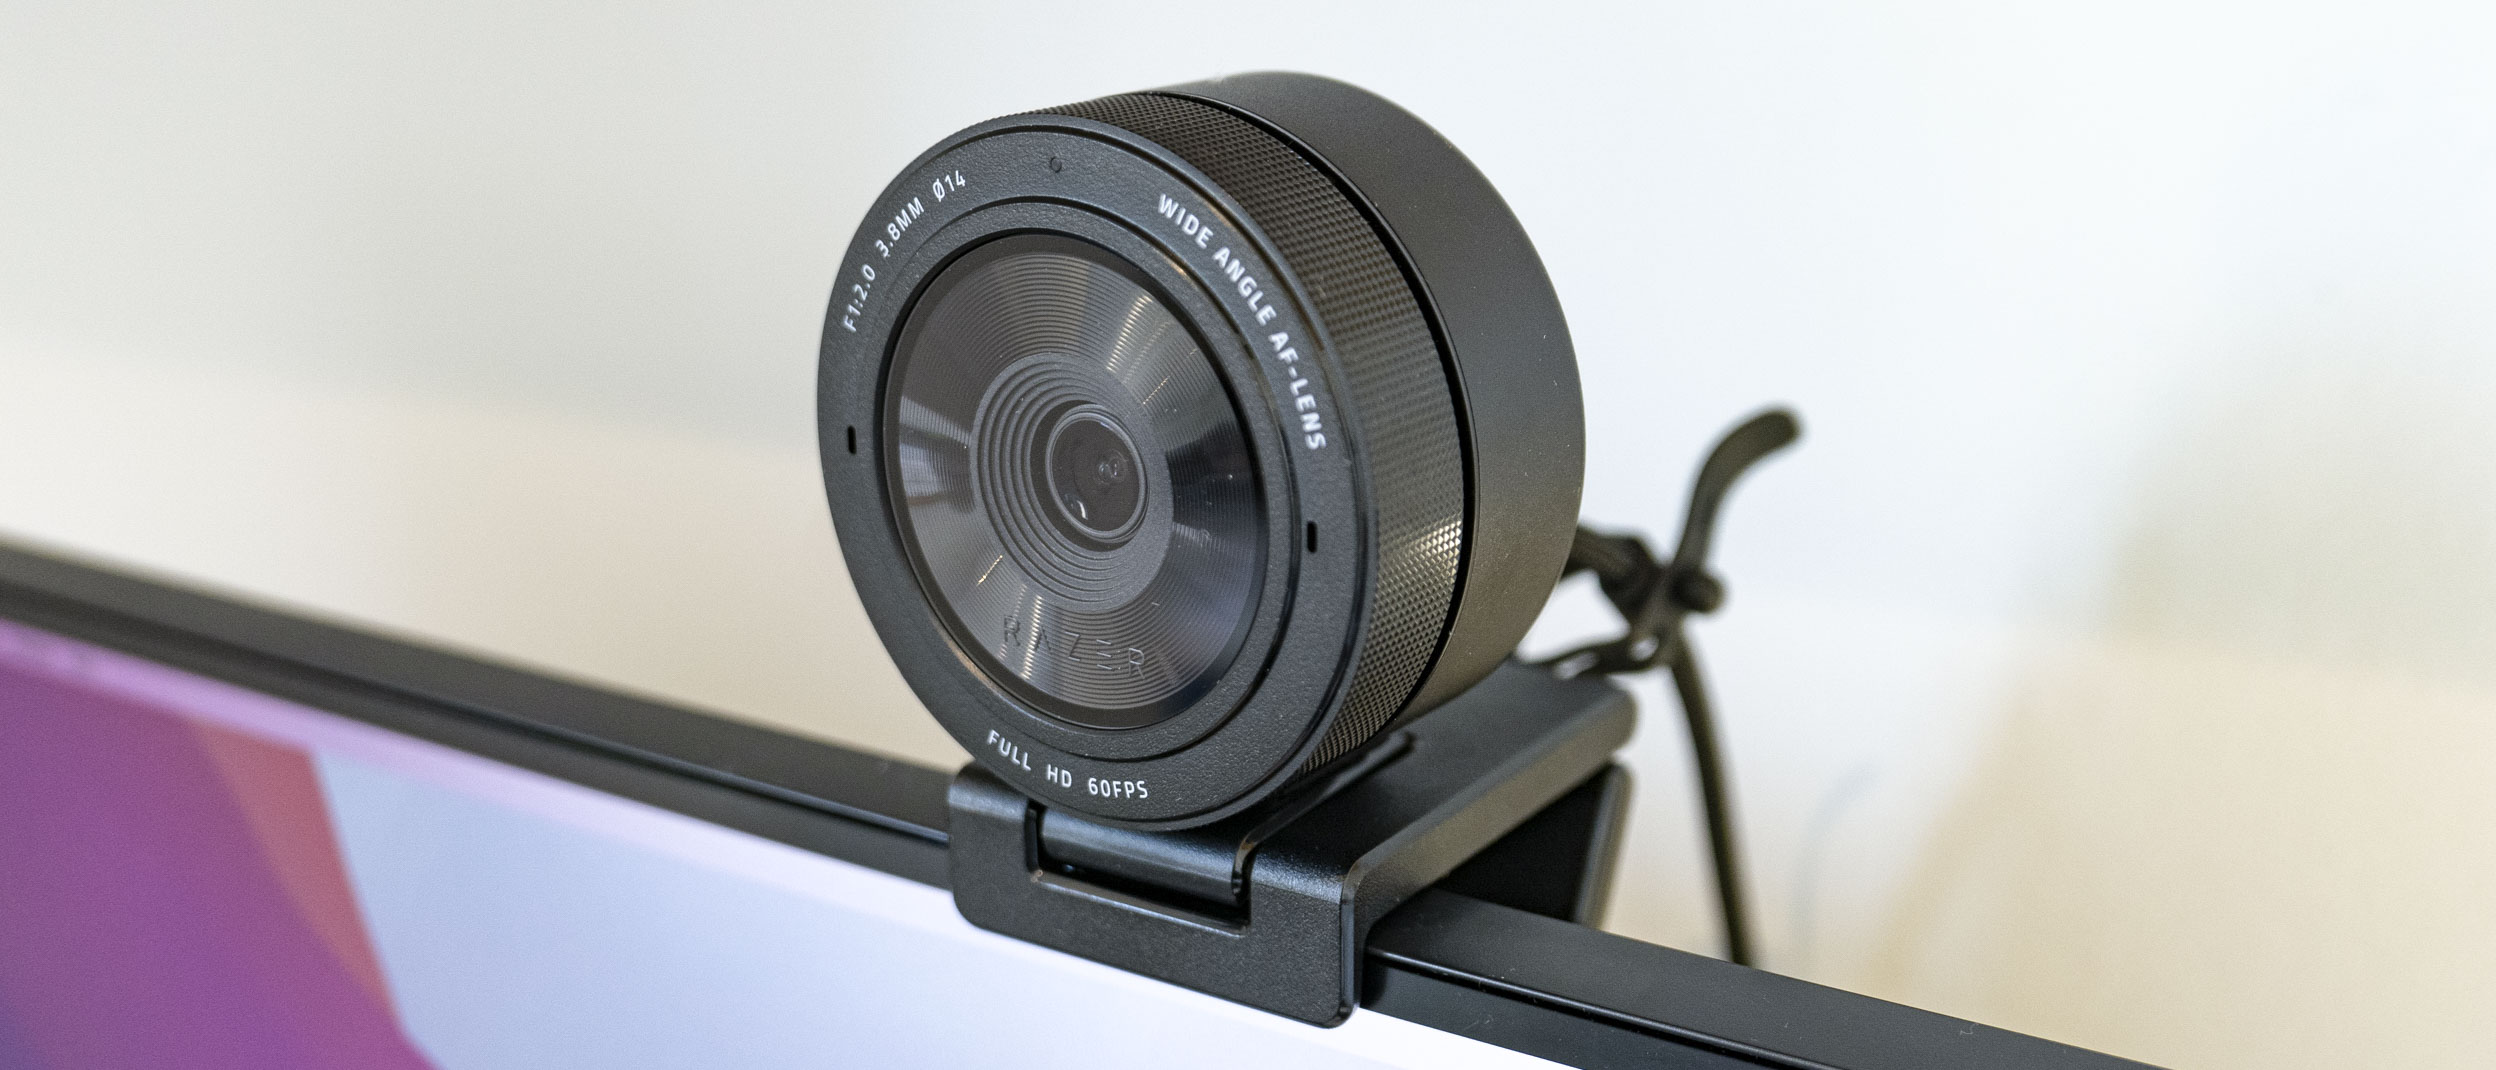 Razer Kiyo Pro webcam improves its image for game streamers and